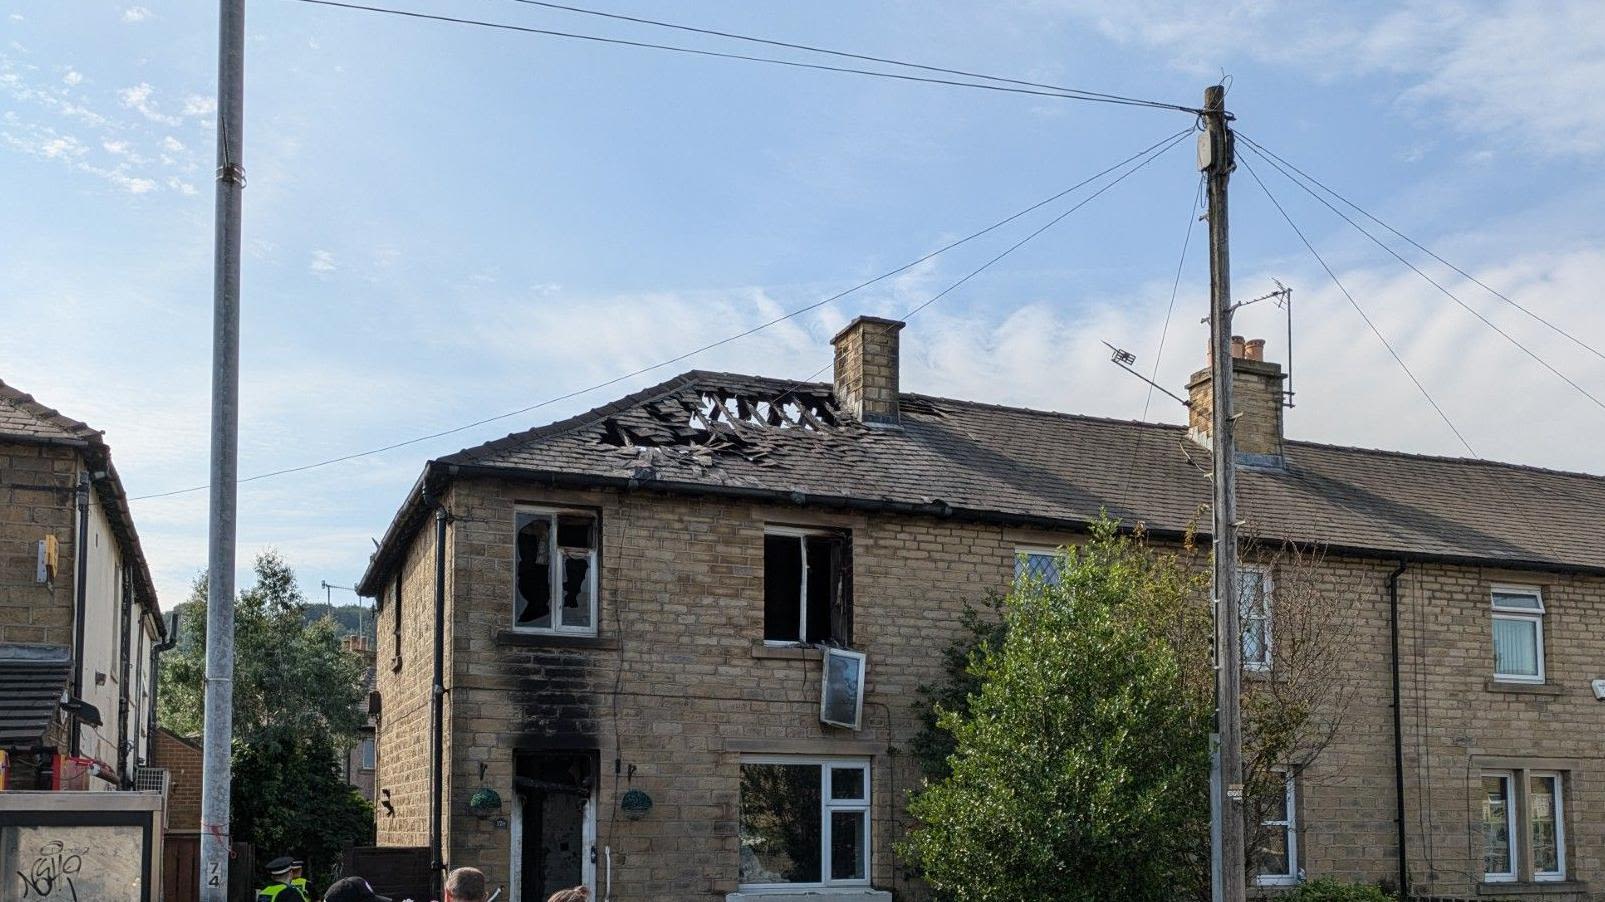 Woman dies and two girls critical after house fire